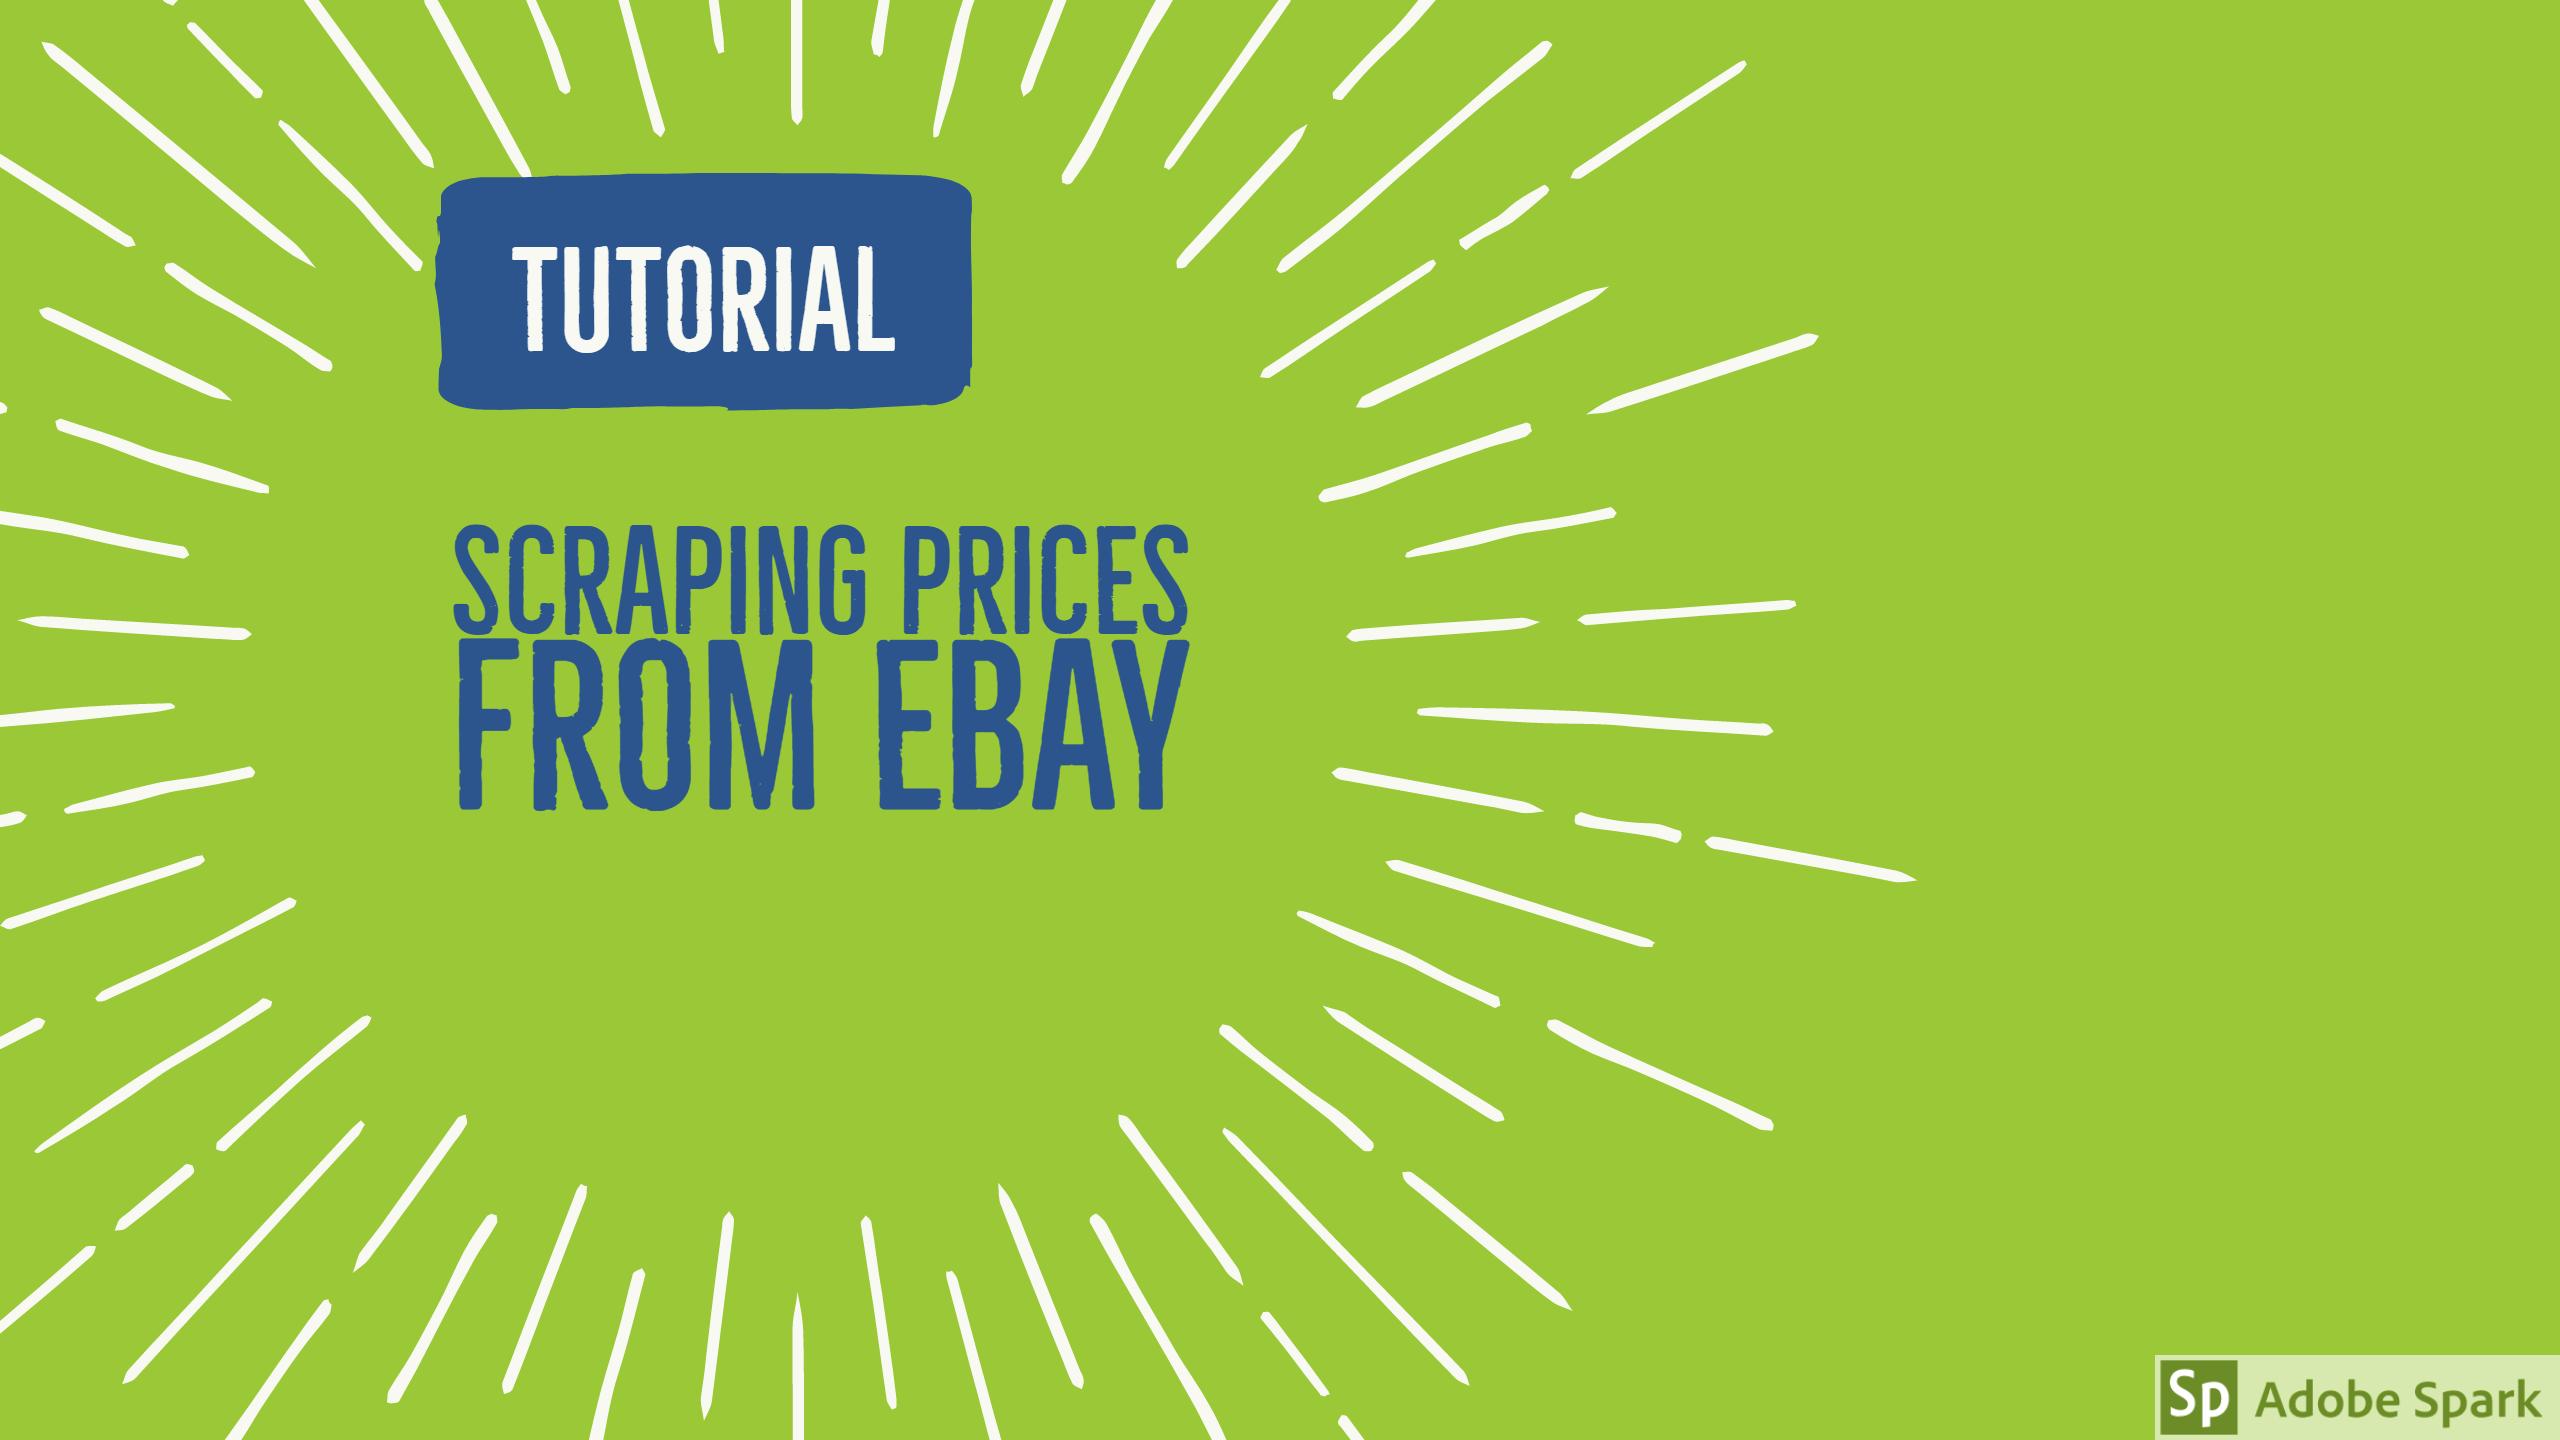 How To Scrape eBay using Python and LXML